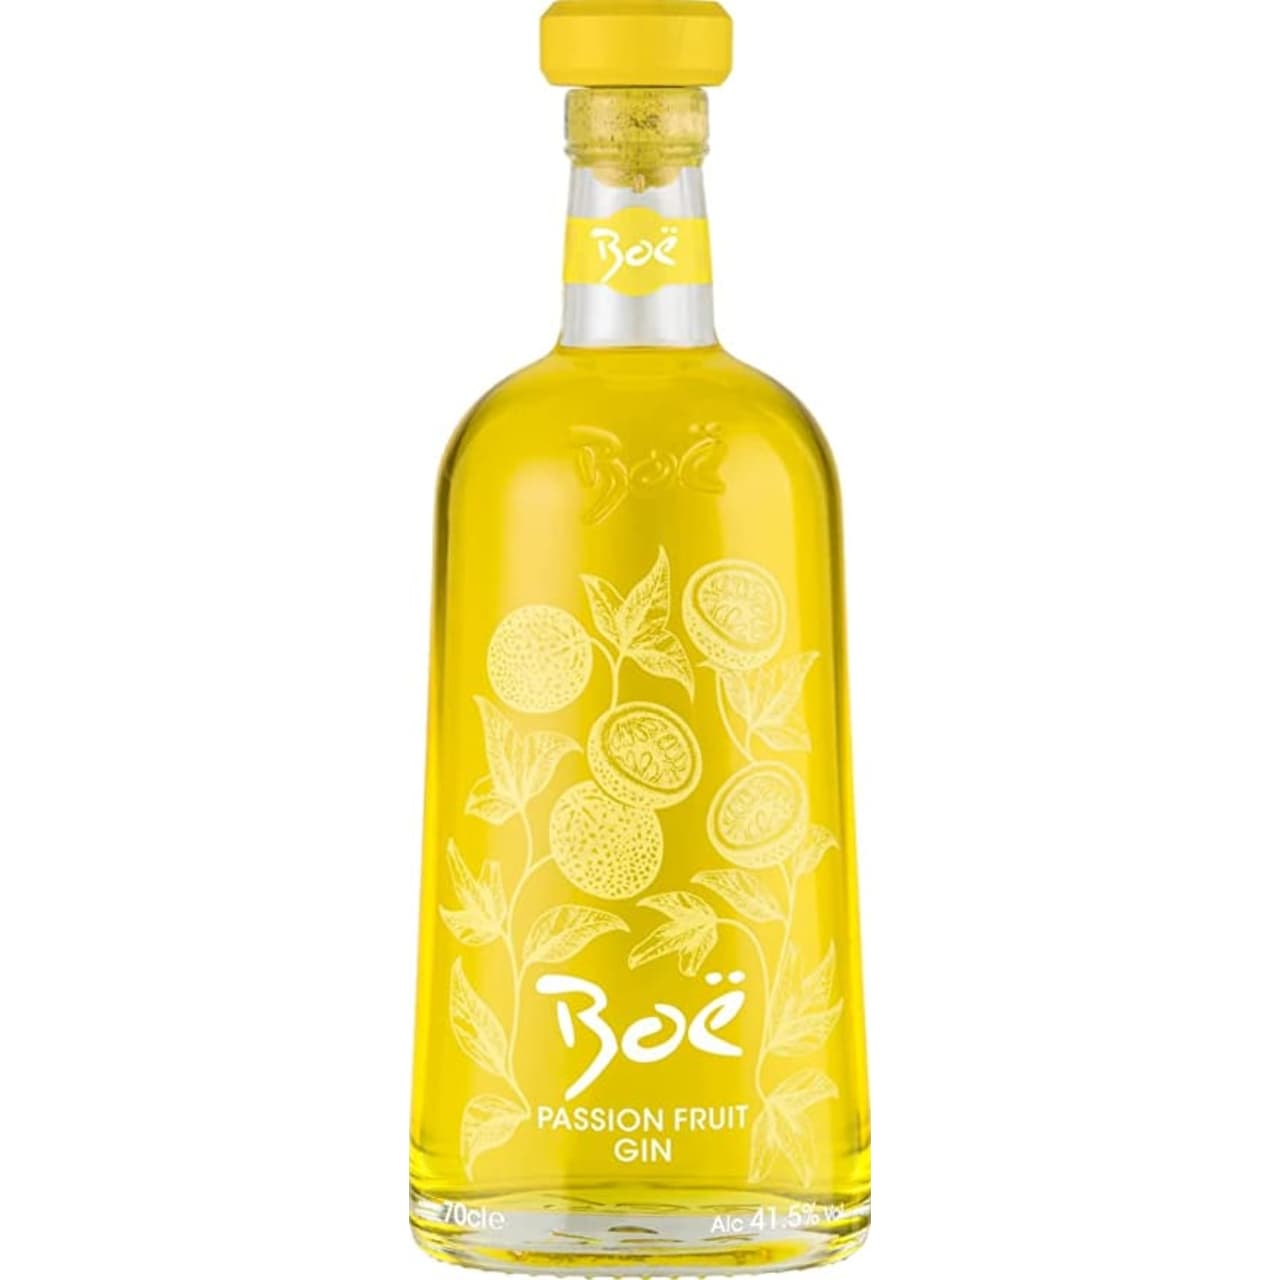 A stylish gin with the warm lingering finish of exotic fruits, sensational aroma and vibrant colour.